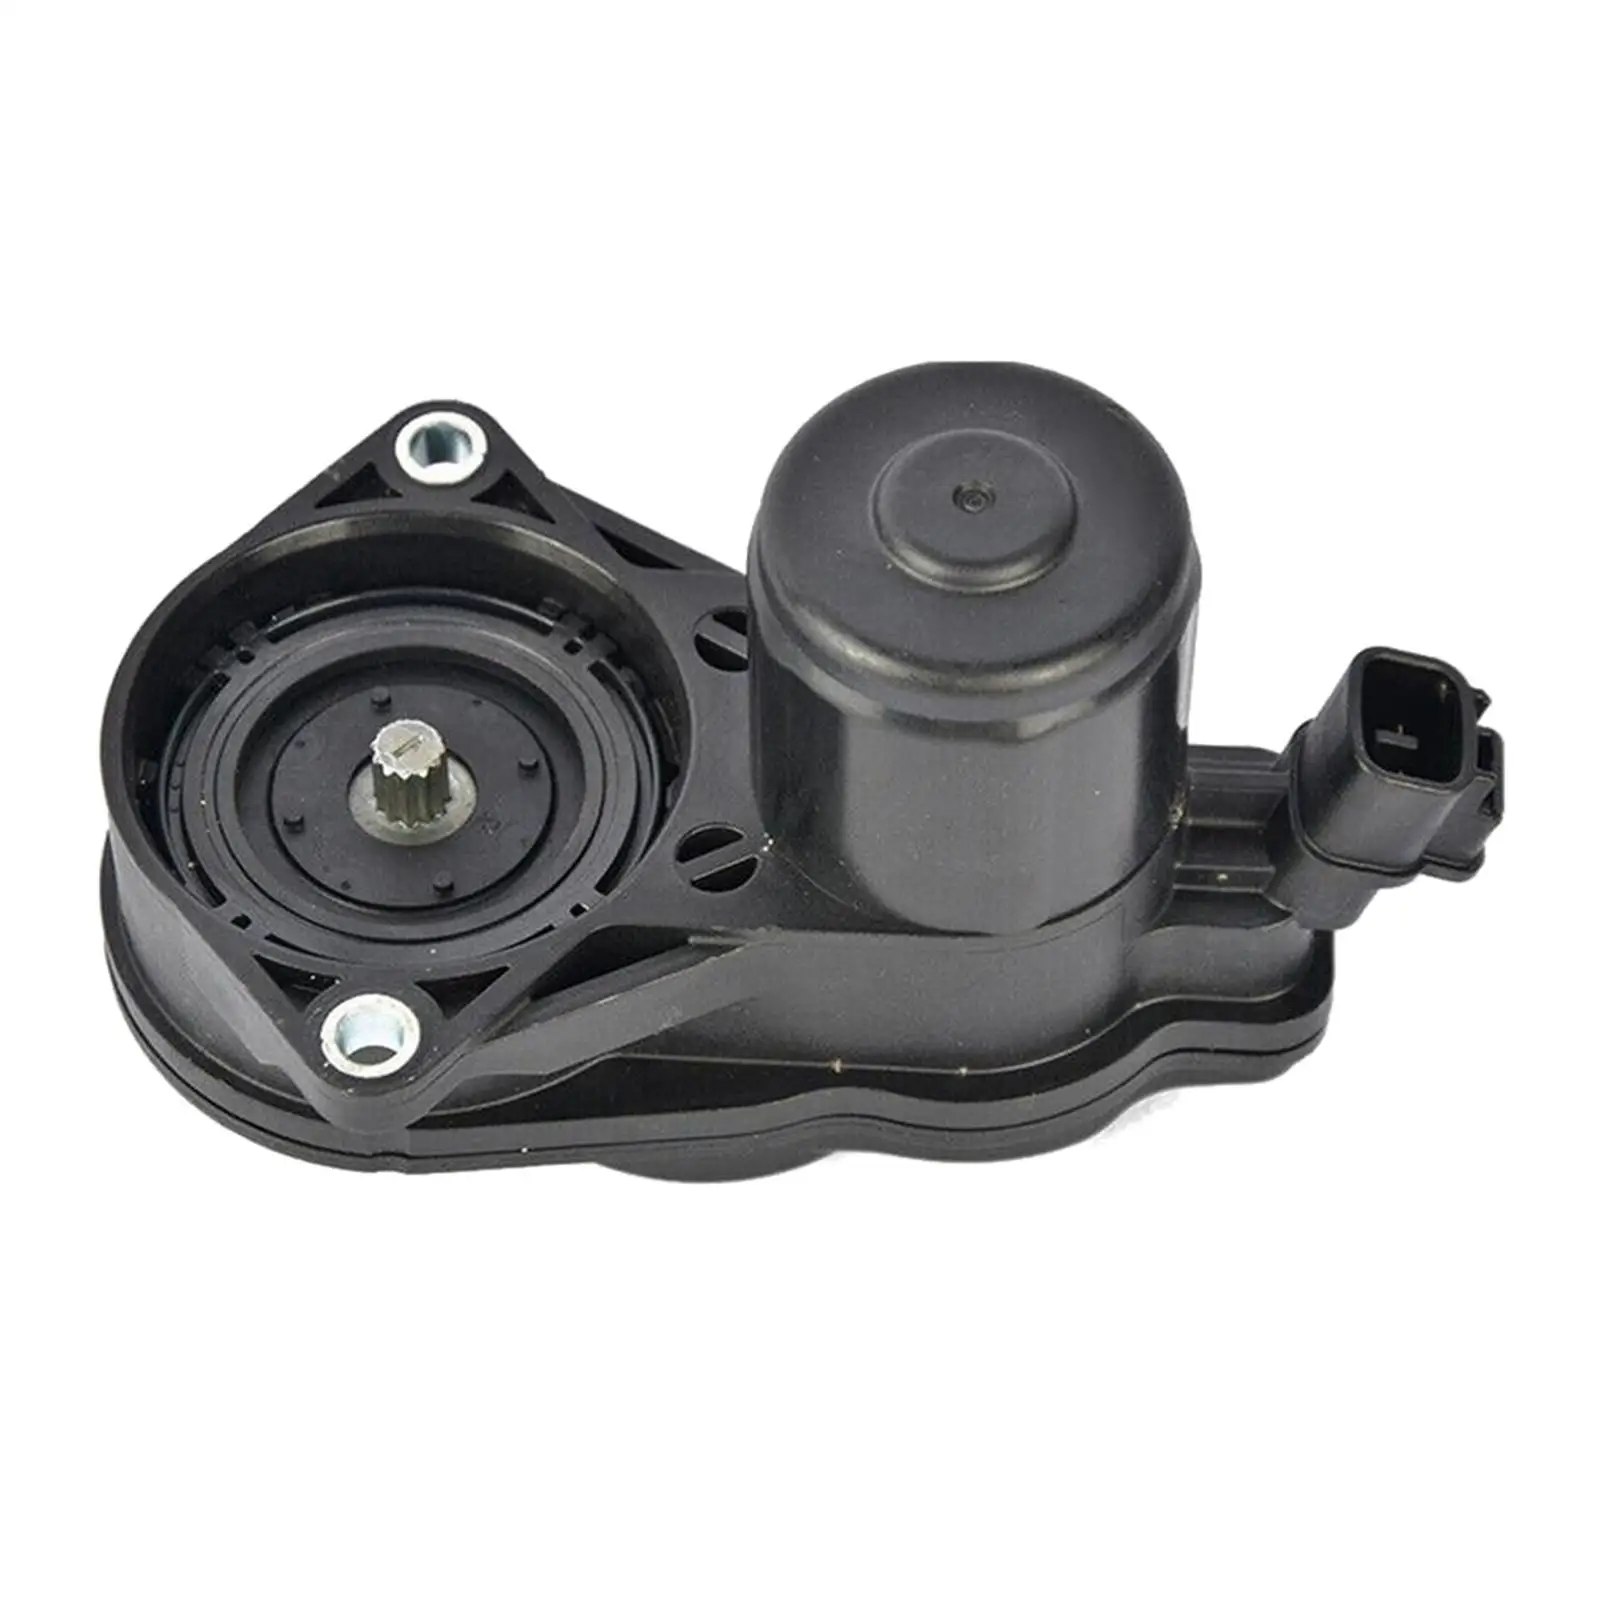 Parking Brake Actuator Automotive Replacement Part Replacement 46310-33010 for Toyota for camry Corolla Hatchback Venza Avalon